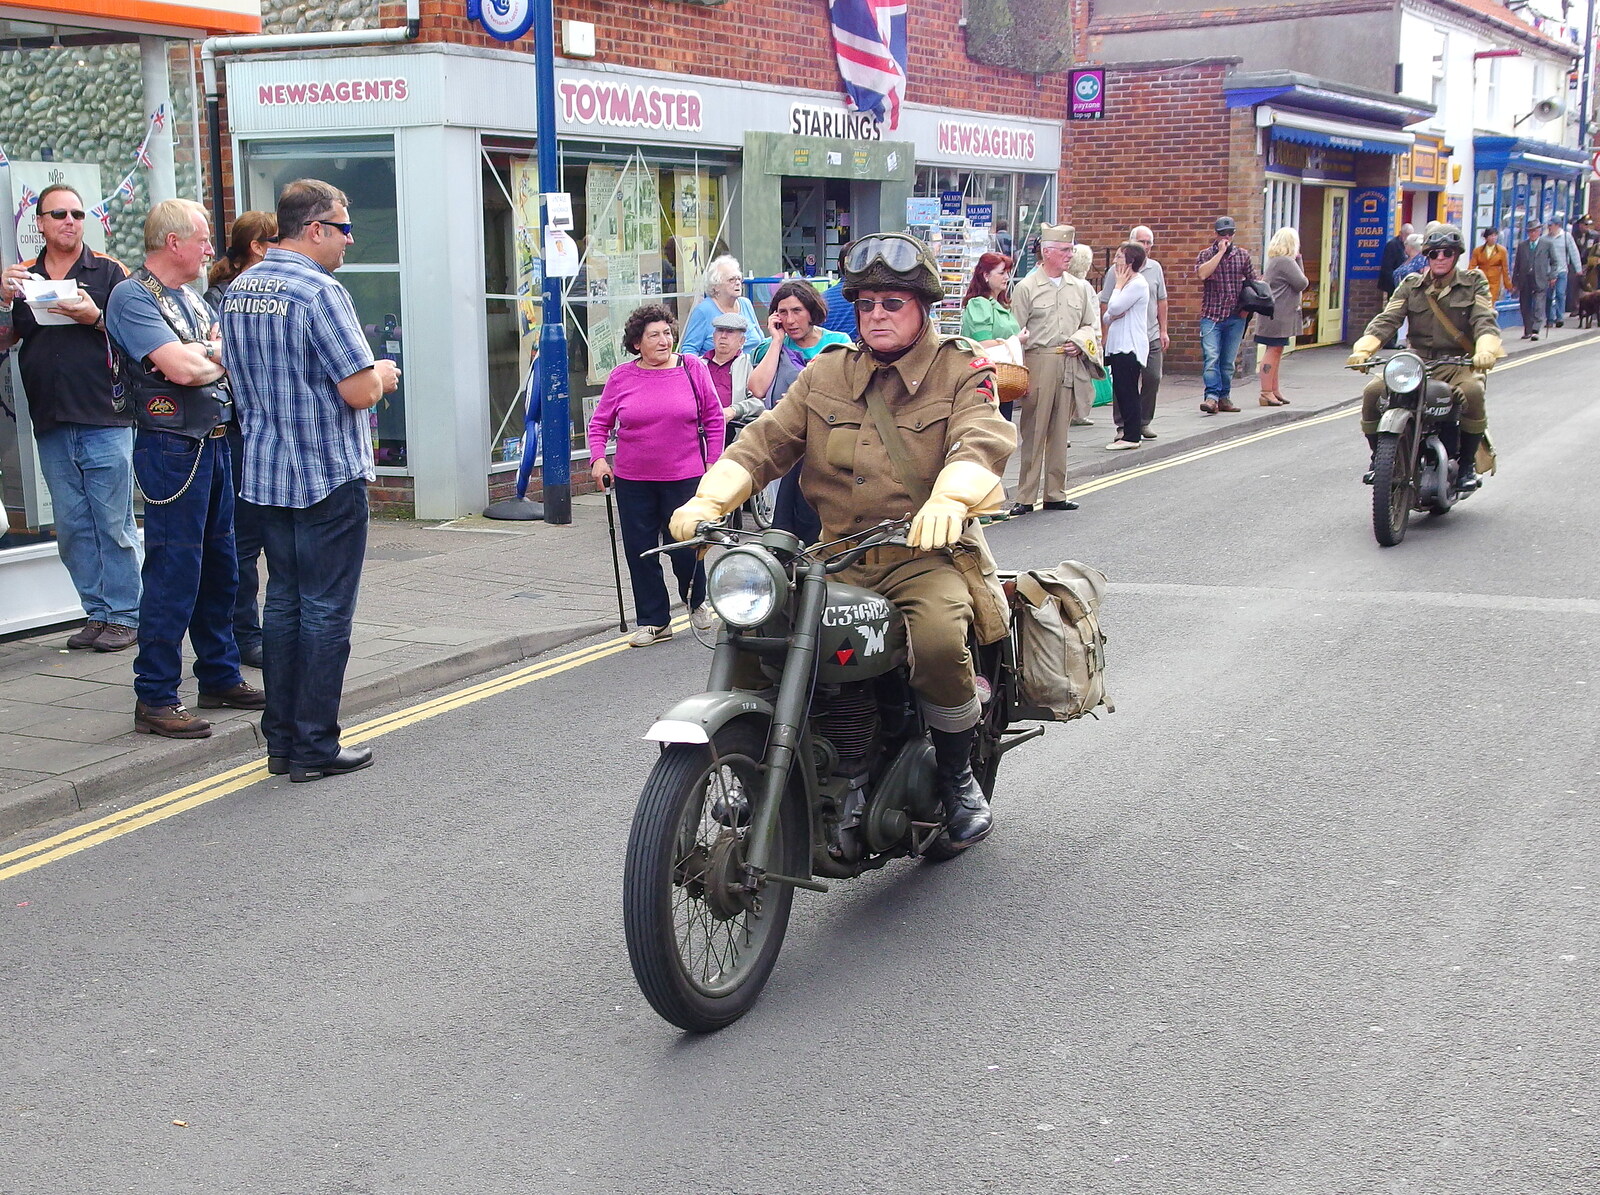 Wartime motorbikes cruise through town from Paul Bear's Adventures at a 1940s Steam Weekend, Holt, Norfolk - 22nd September 2013